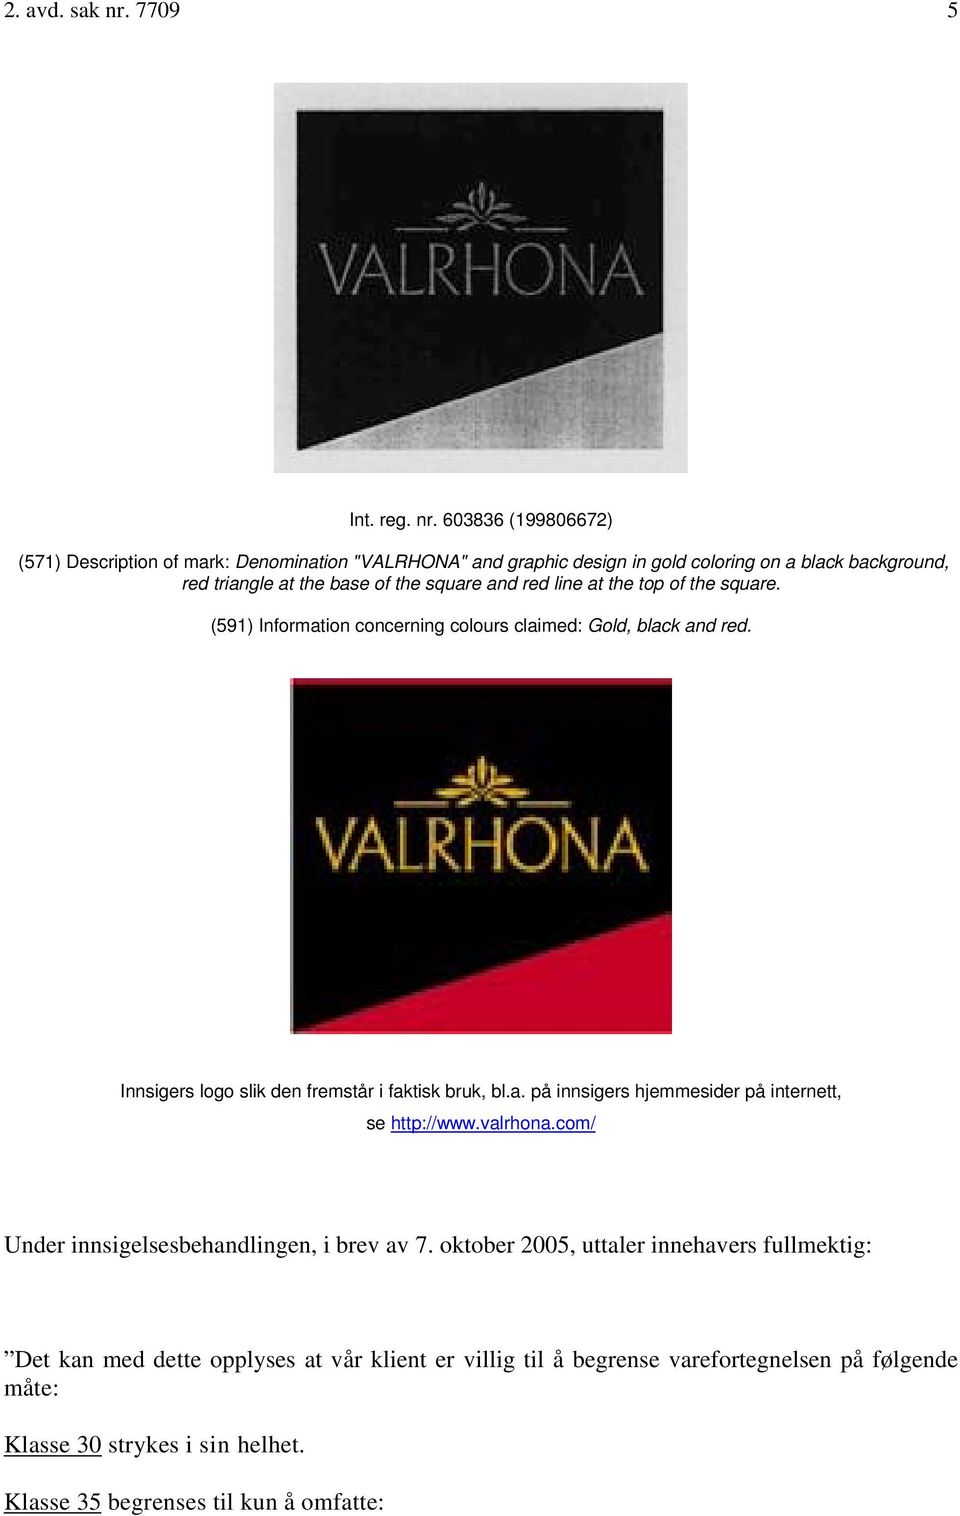 603836 (199806672) (571) Description of mark: Denomination "VALRHONA" and graphic design in gold coloring on a black background, red triangle at the base of the square and